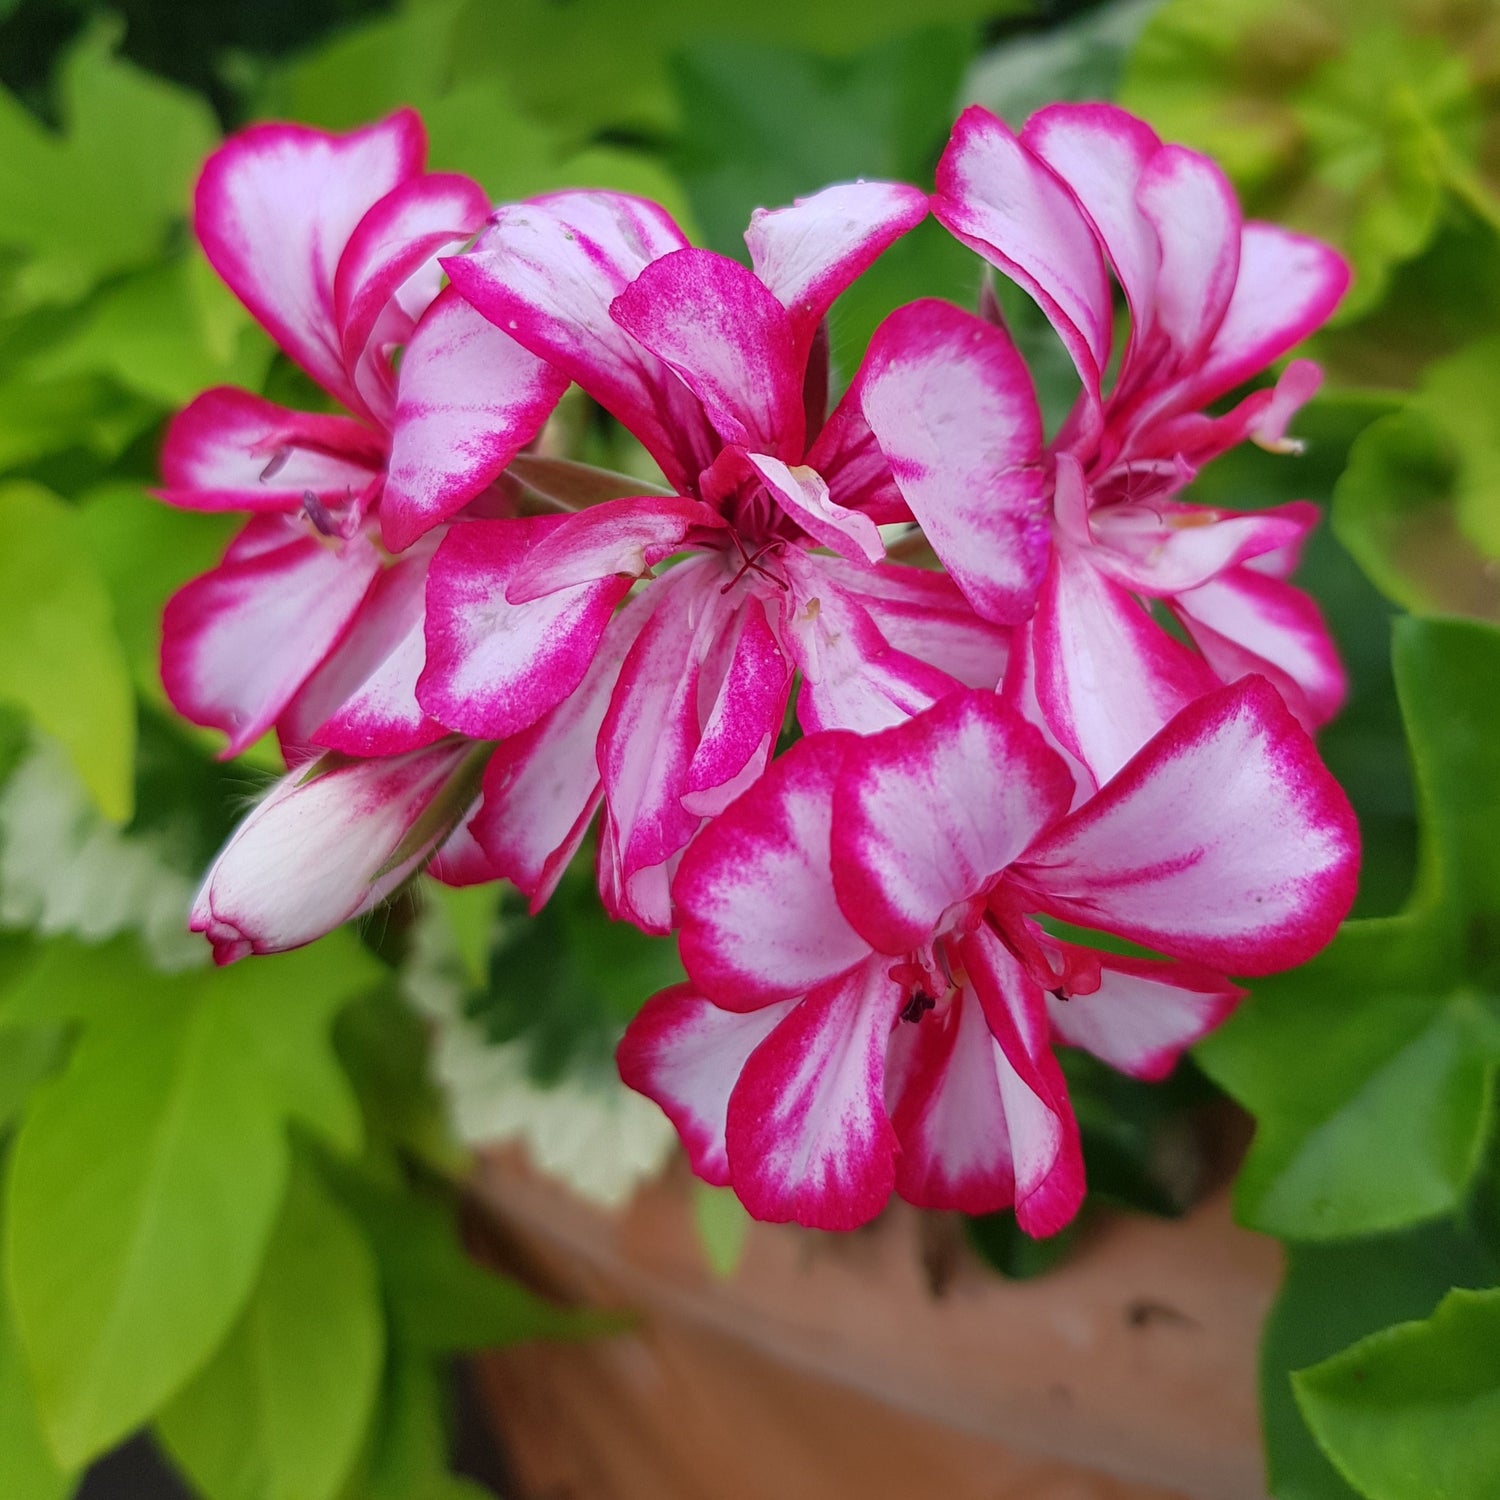 This is an Ivy Leaved Pelargonium (Gernanium) called 'Rouletta' and it produces fantastic white flowers which are bordered with bright pink edges to the petals